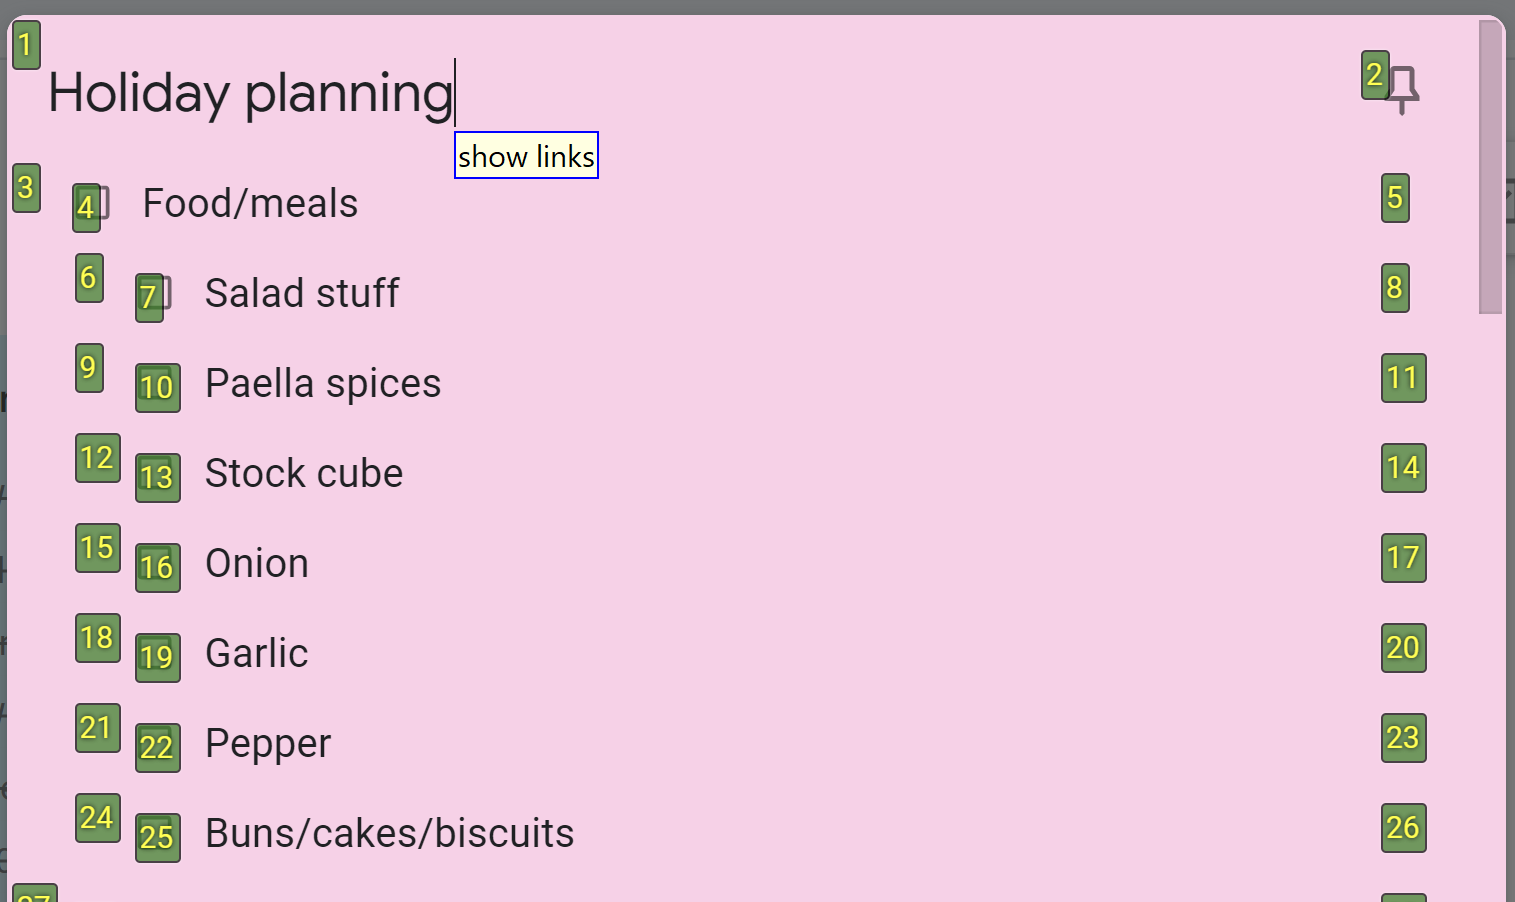 Screenshot of part of Google Keep list showing food items for packing.